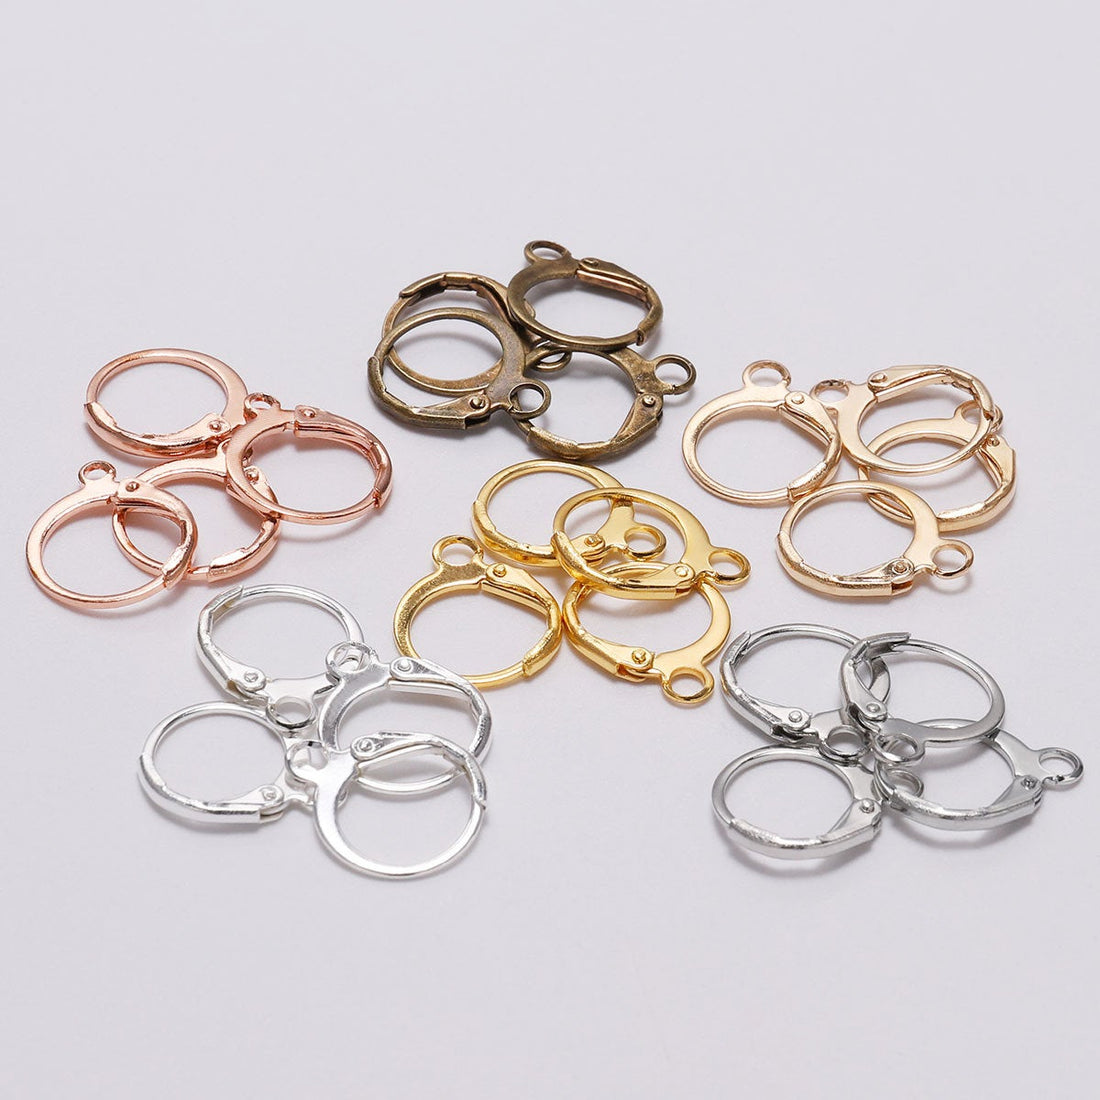 10pcs Stainless Steel French Earrings Base Lever Back Ear Wire Hoop Open  Loop Earring Hooks For DIY Jewelry Making Small Business Supplies